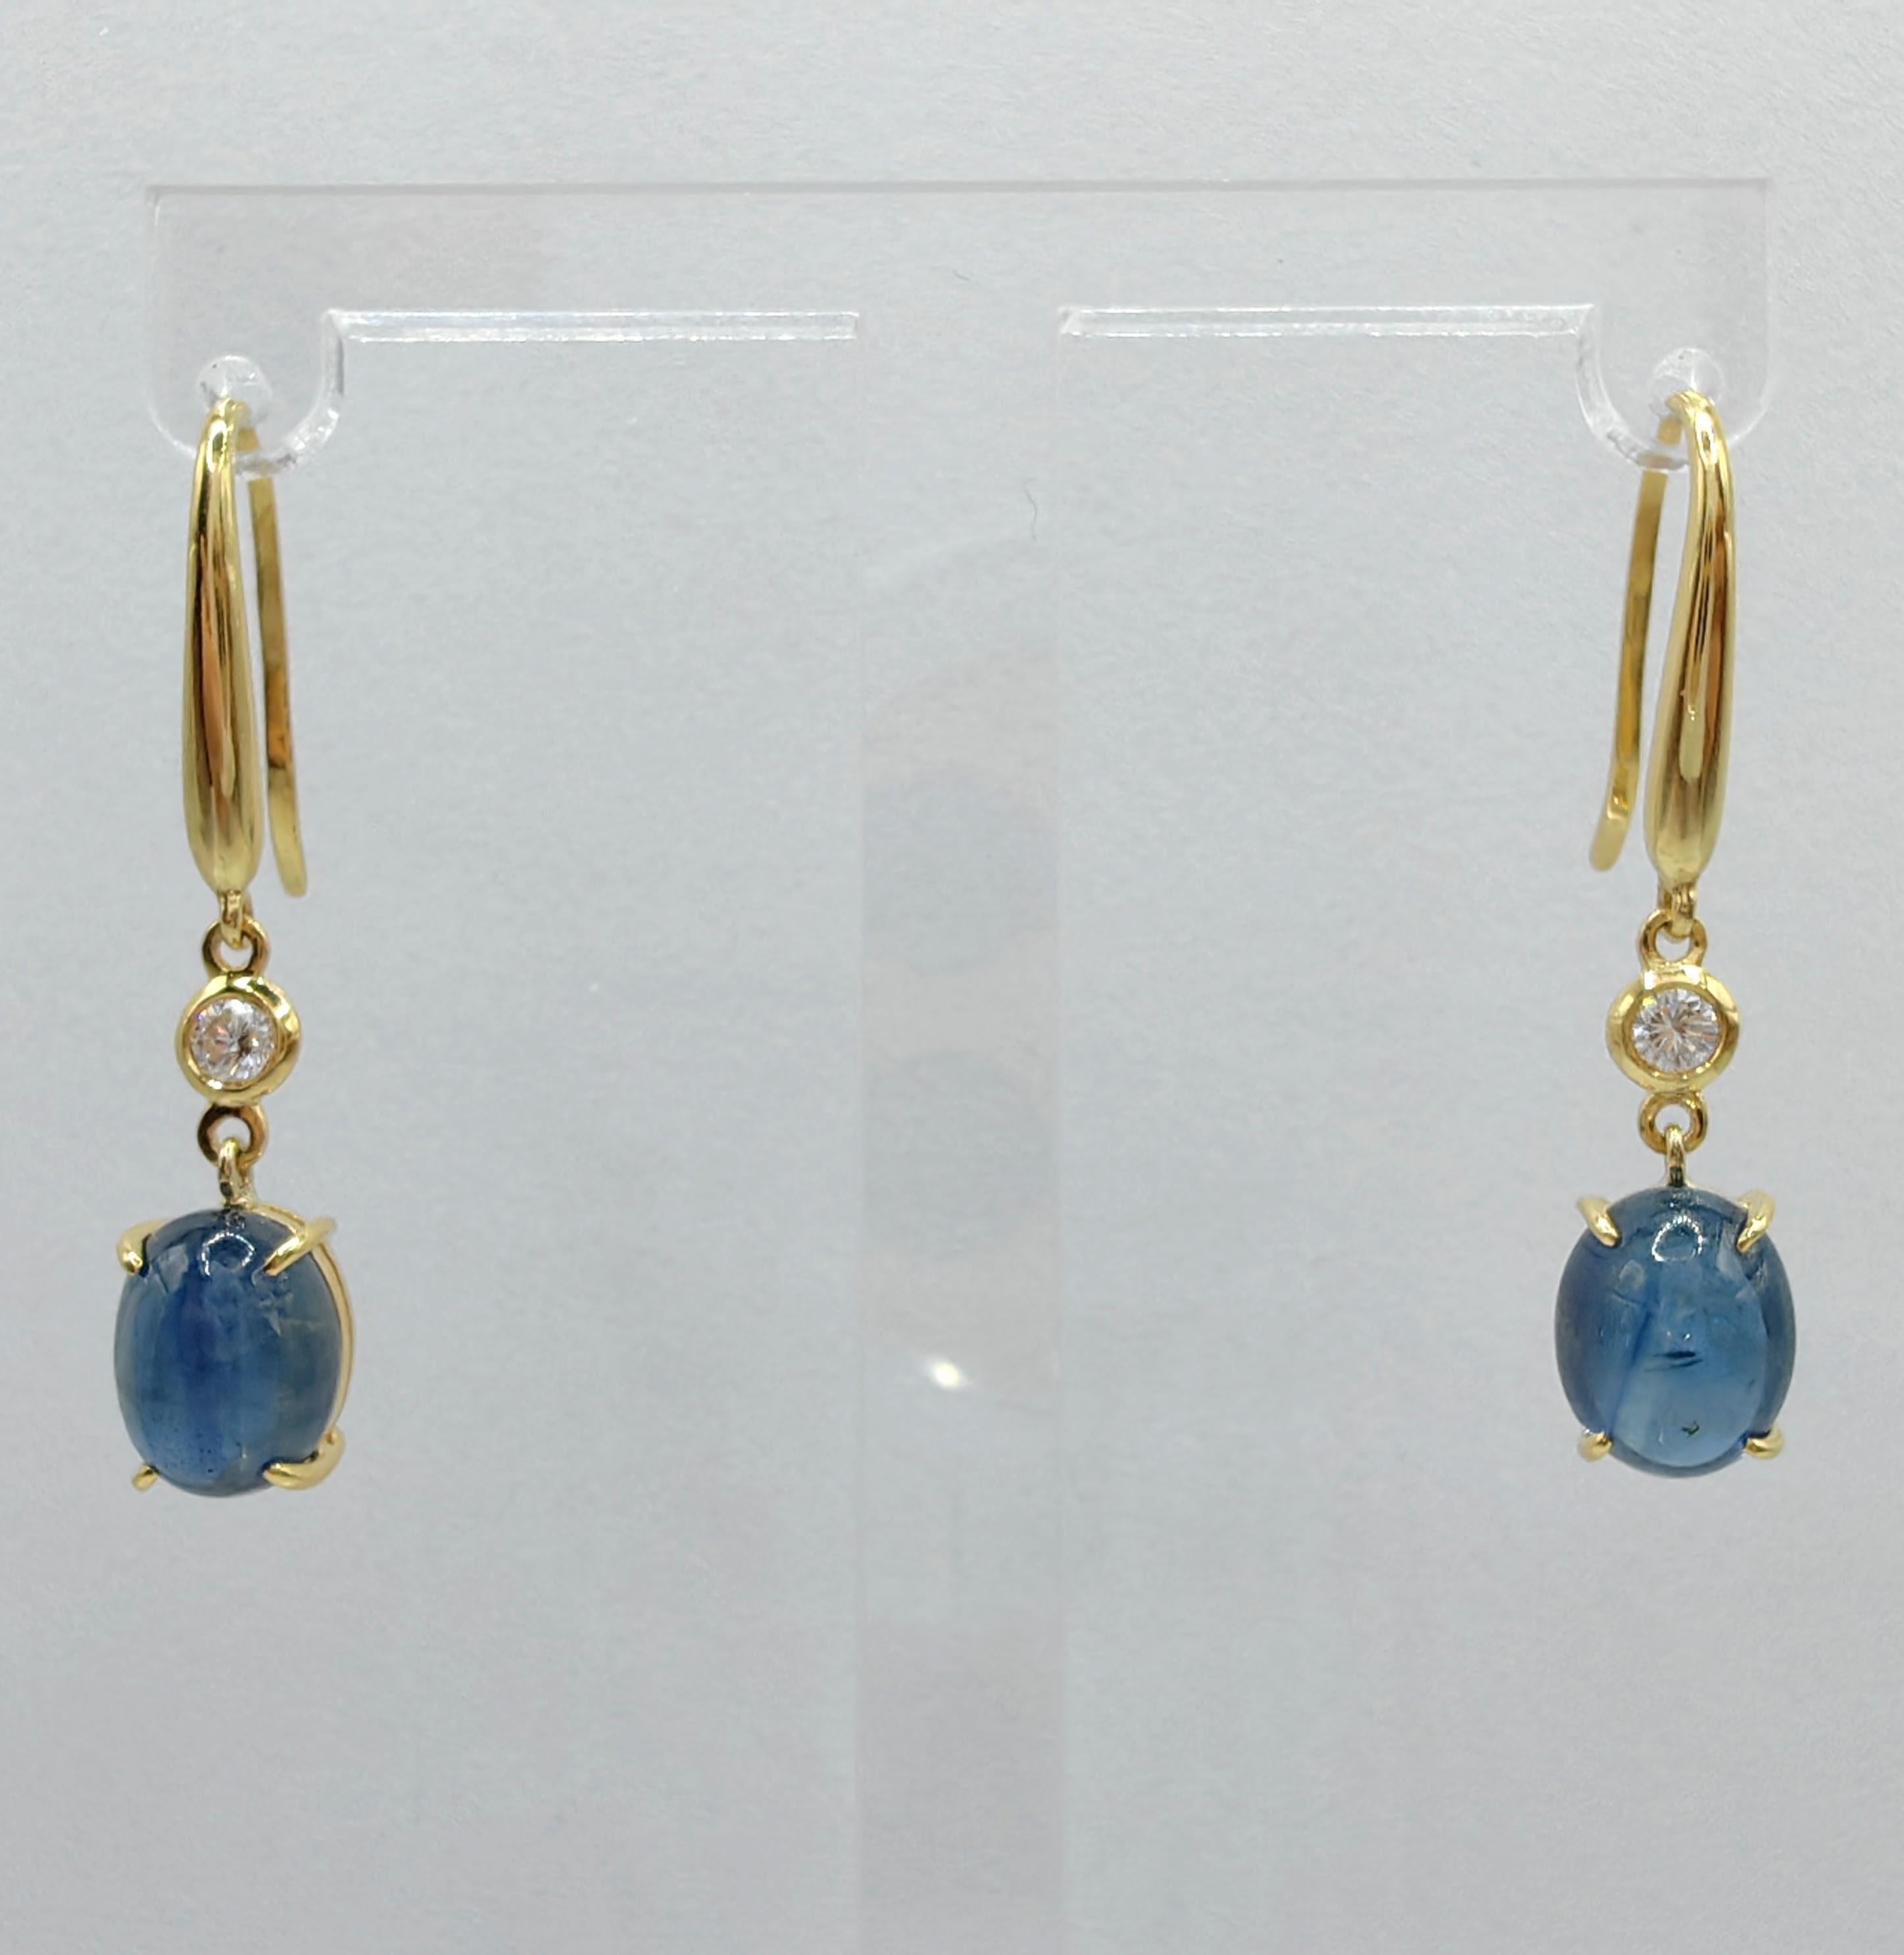 Introducing our exquisite 6.13ct Cabochon Blue Sapphire Diamond Dangling Earrings, where the captivating beauty of blue sapphires and brilliant diamonds takes center stage. 

At the heart of these earrings are two mesmerizing cabochon blue